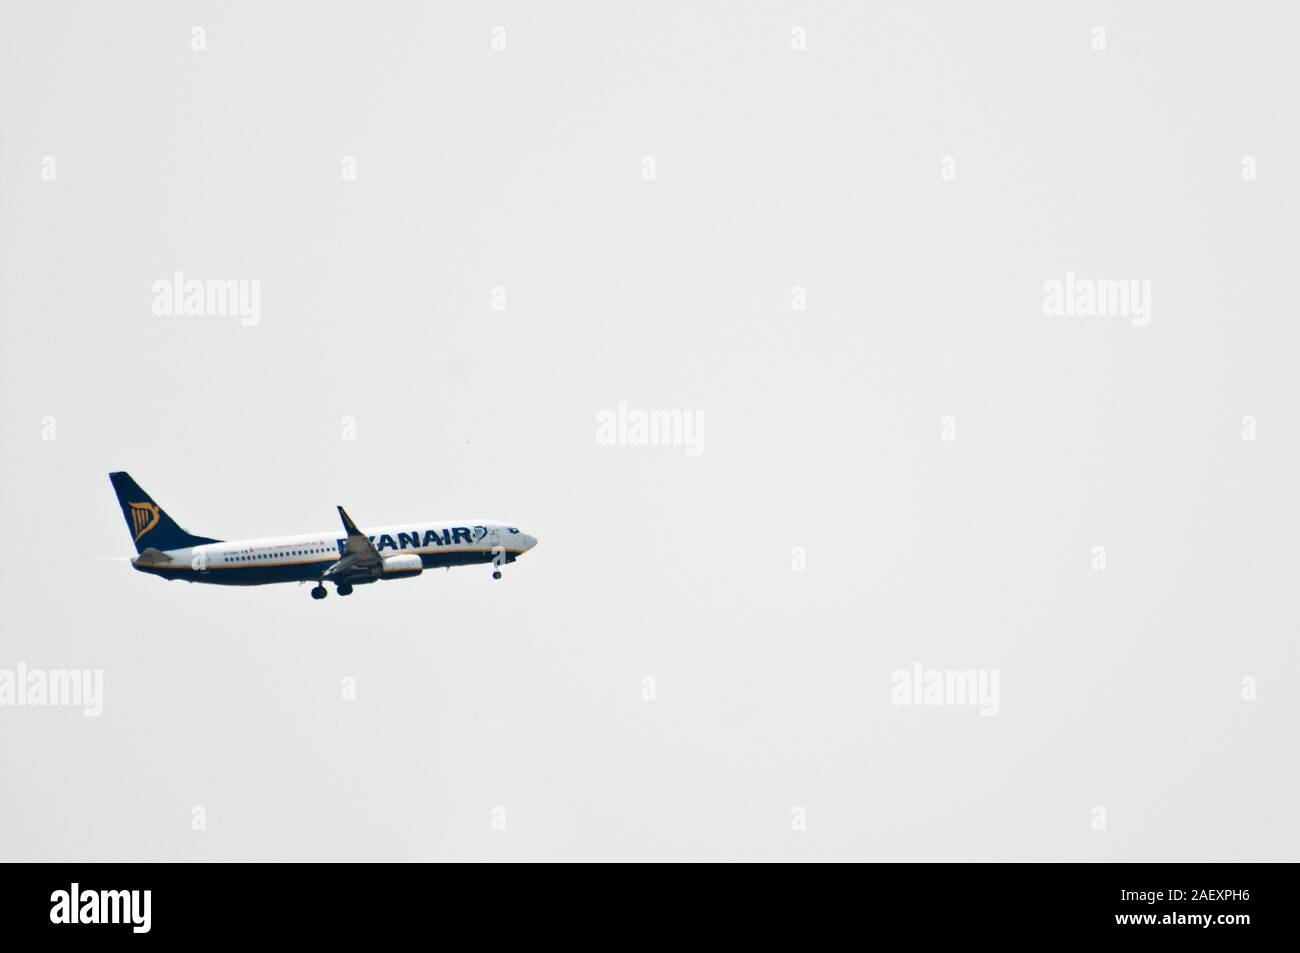 Rayanair commercial airplane Stock Photo